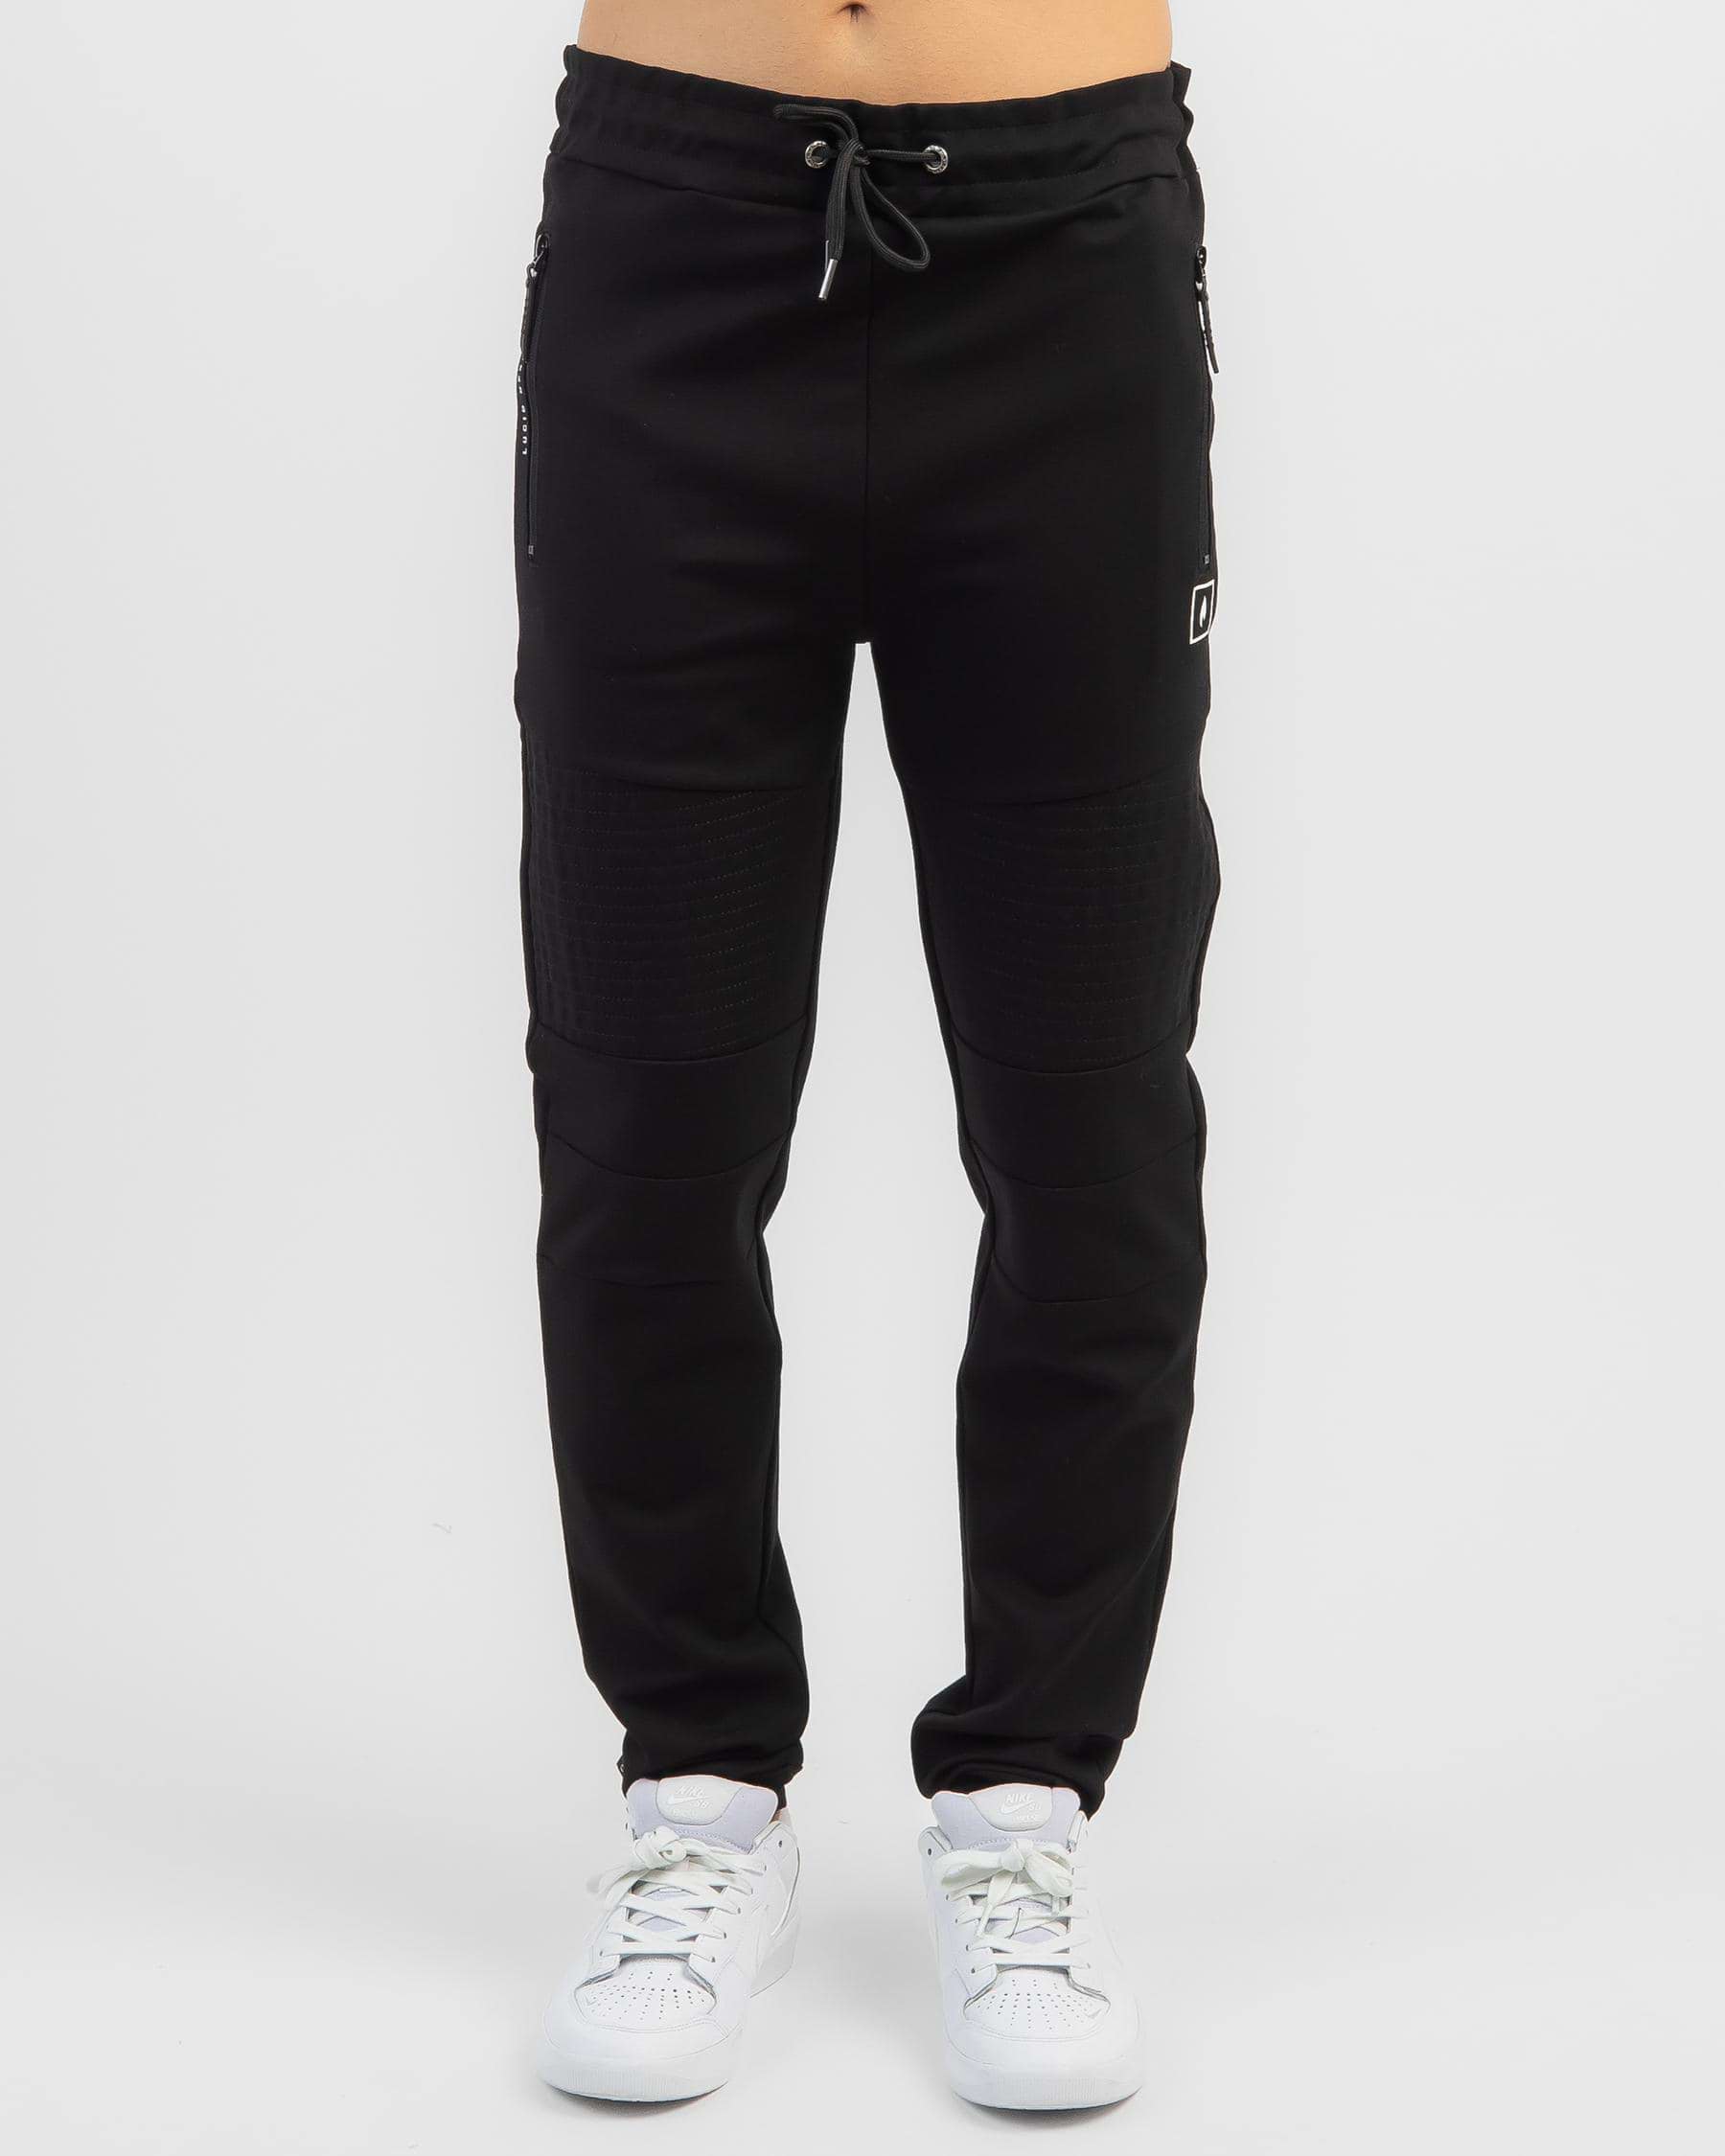 Shop Lucid Compose Track Pants In Black - Fast Shipping & Easy Returns ...